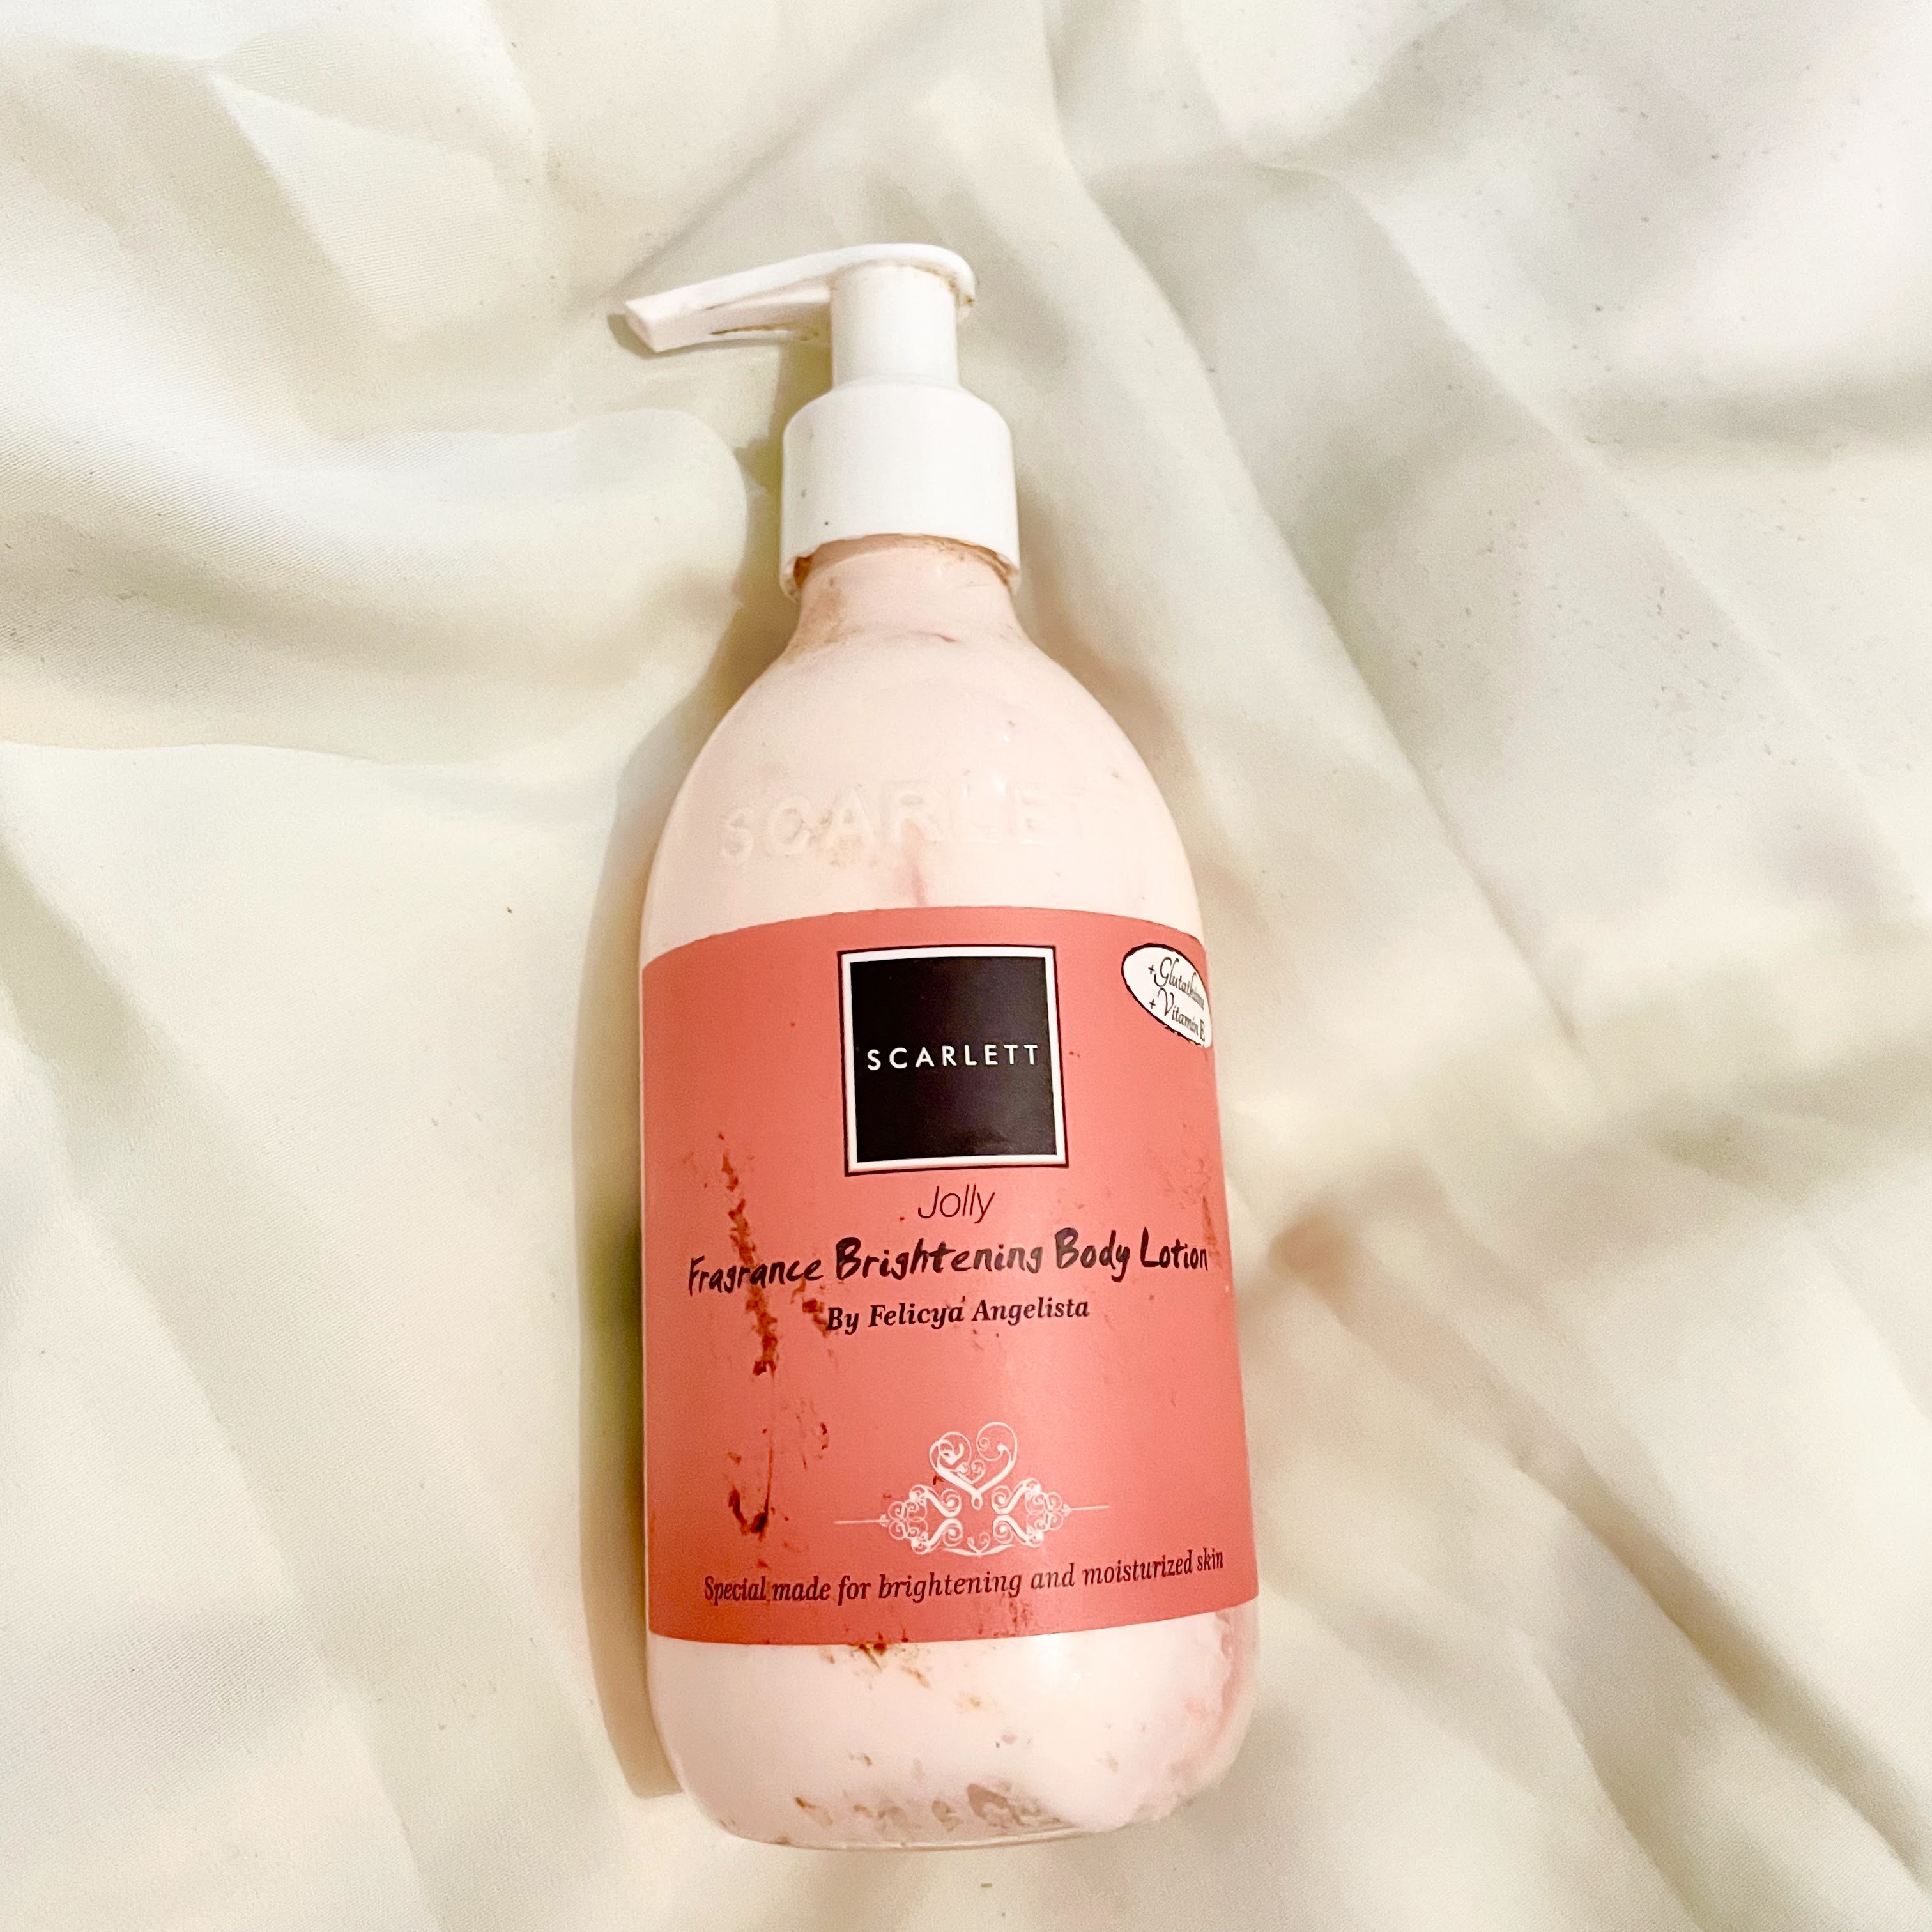 Rsjournal - Scarlett Brightening Body Lotion - Which One Is Your Favorite?